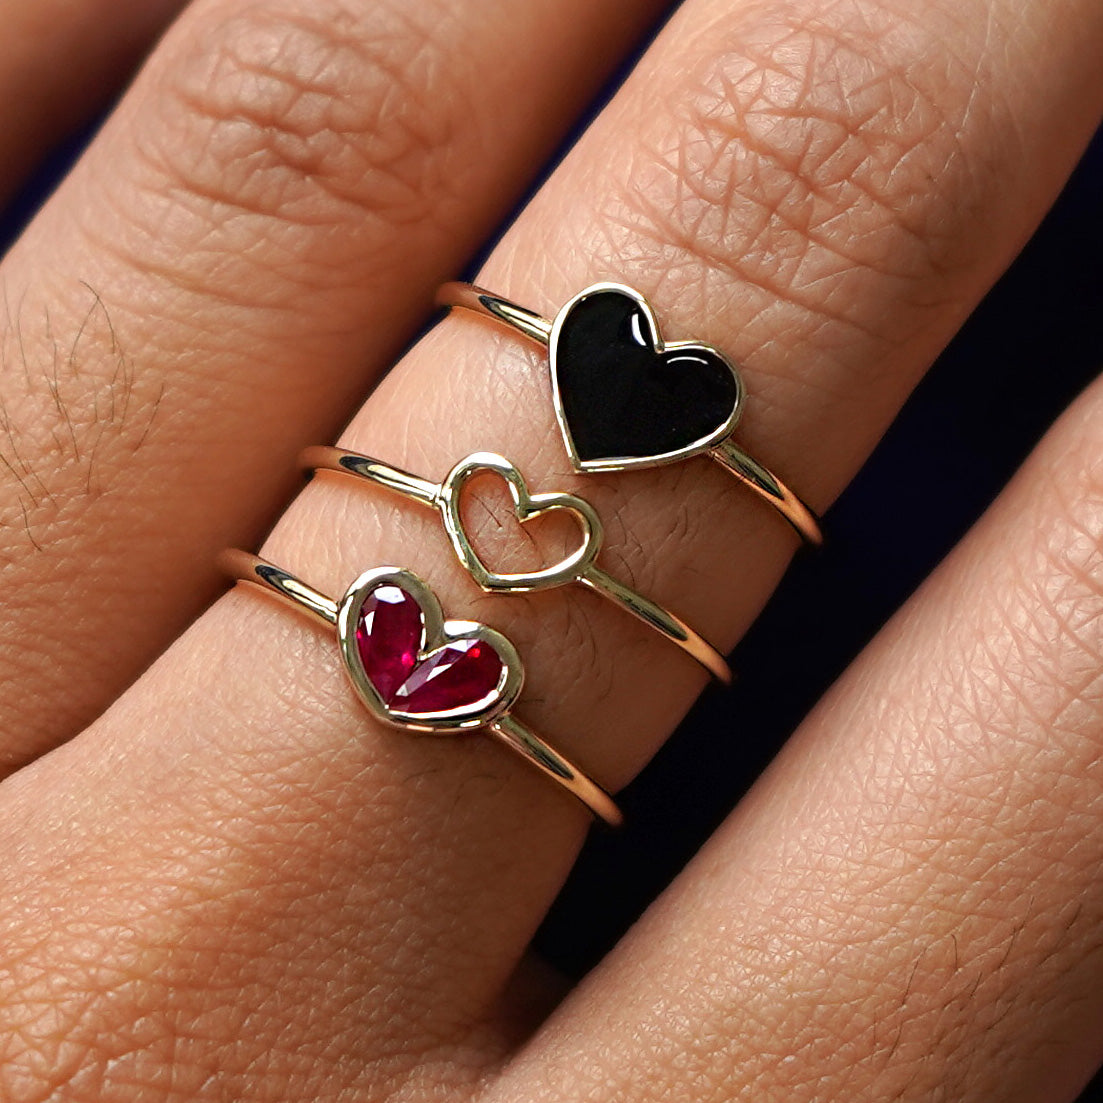 Close up view of a model's finger wearing a Ruby Heart Ring, a Heart Ring, and a black Enamel Heart Ring in a stack